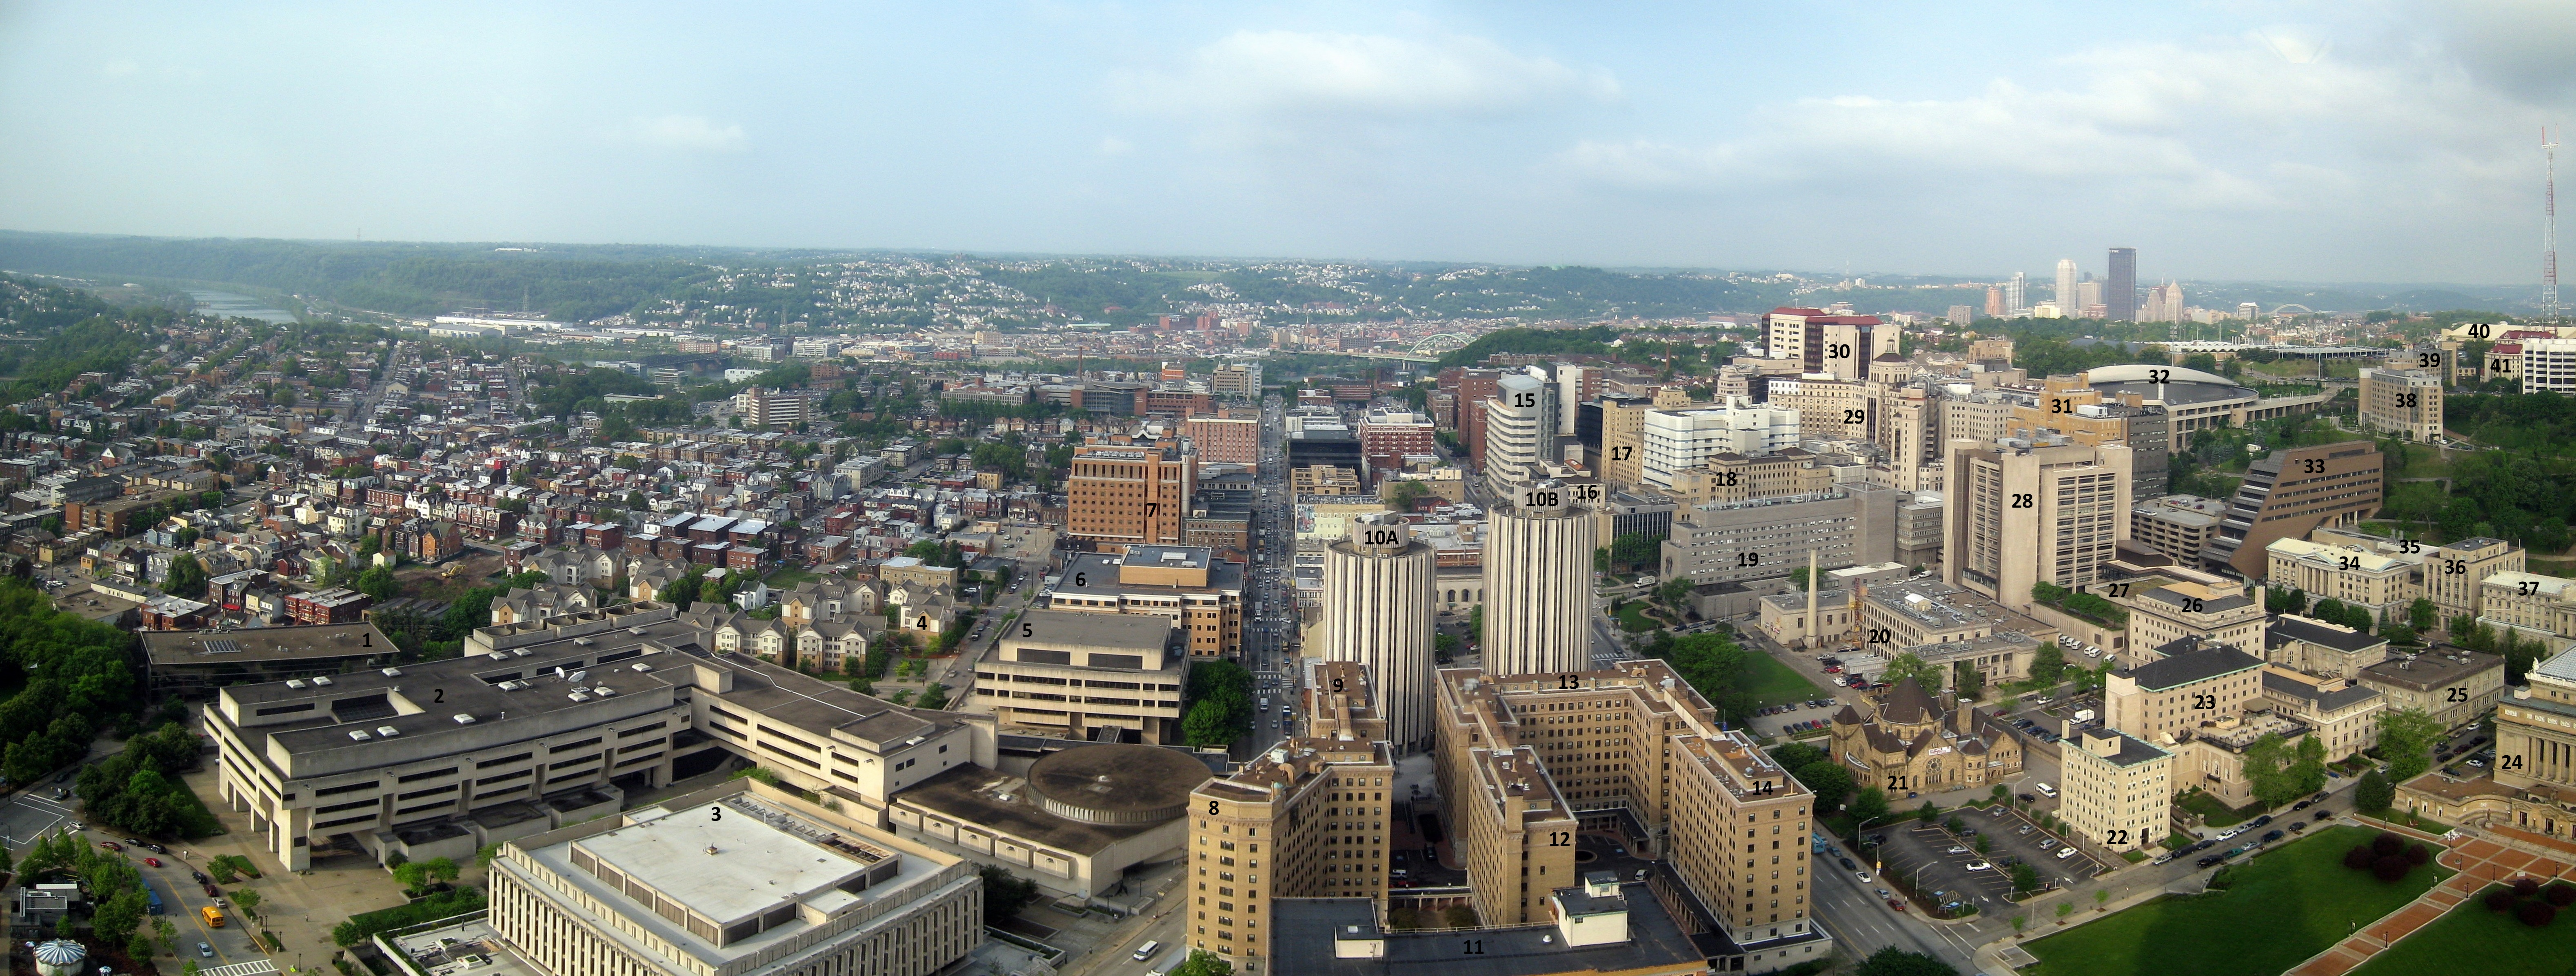 University Of Pittsburgh Looking South West Seen From The Cathedral